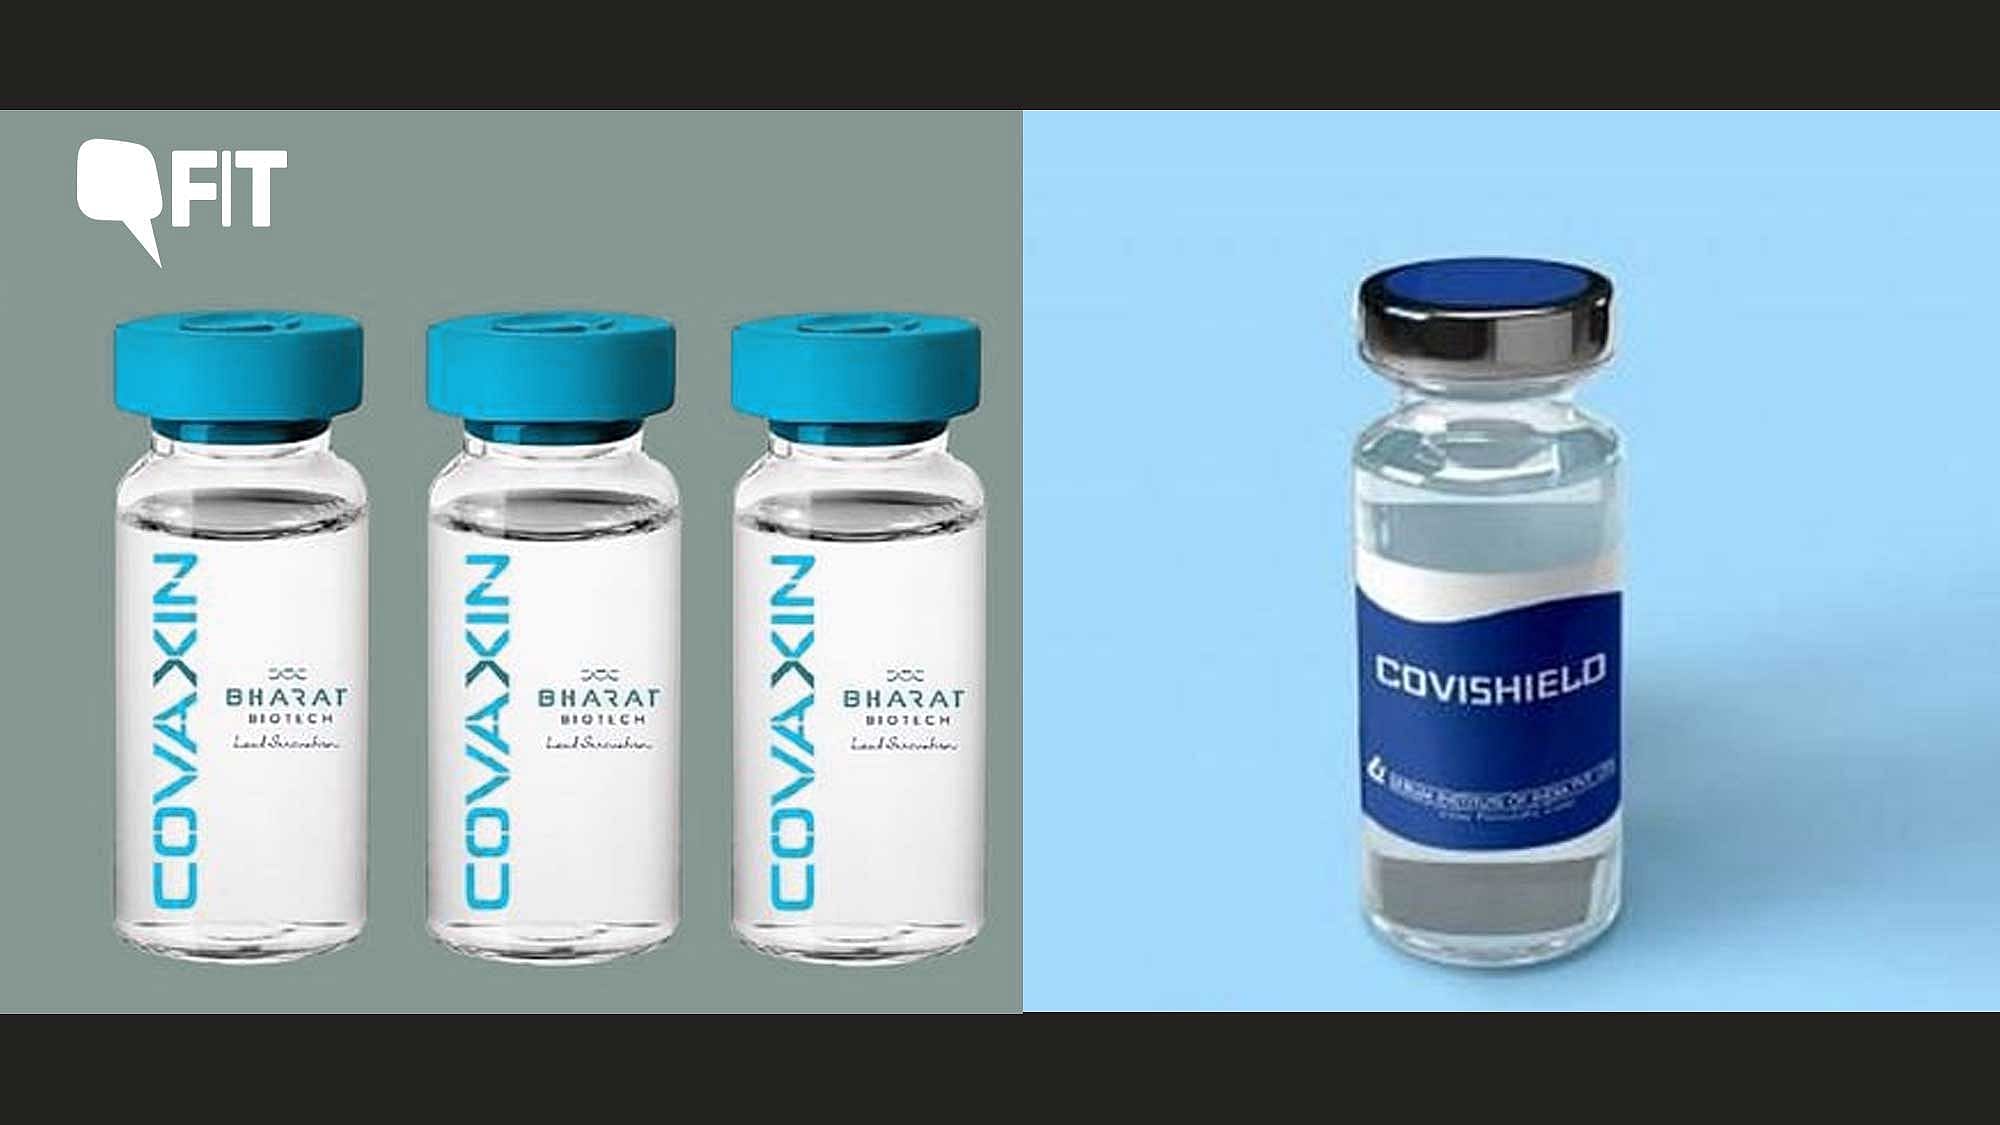 A study claims Covishield produces better antibody response compared to Covaxin.